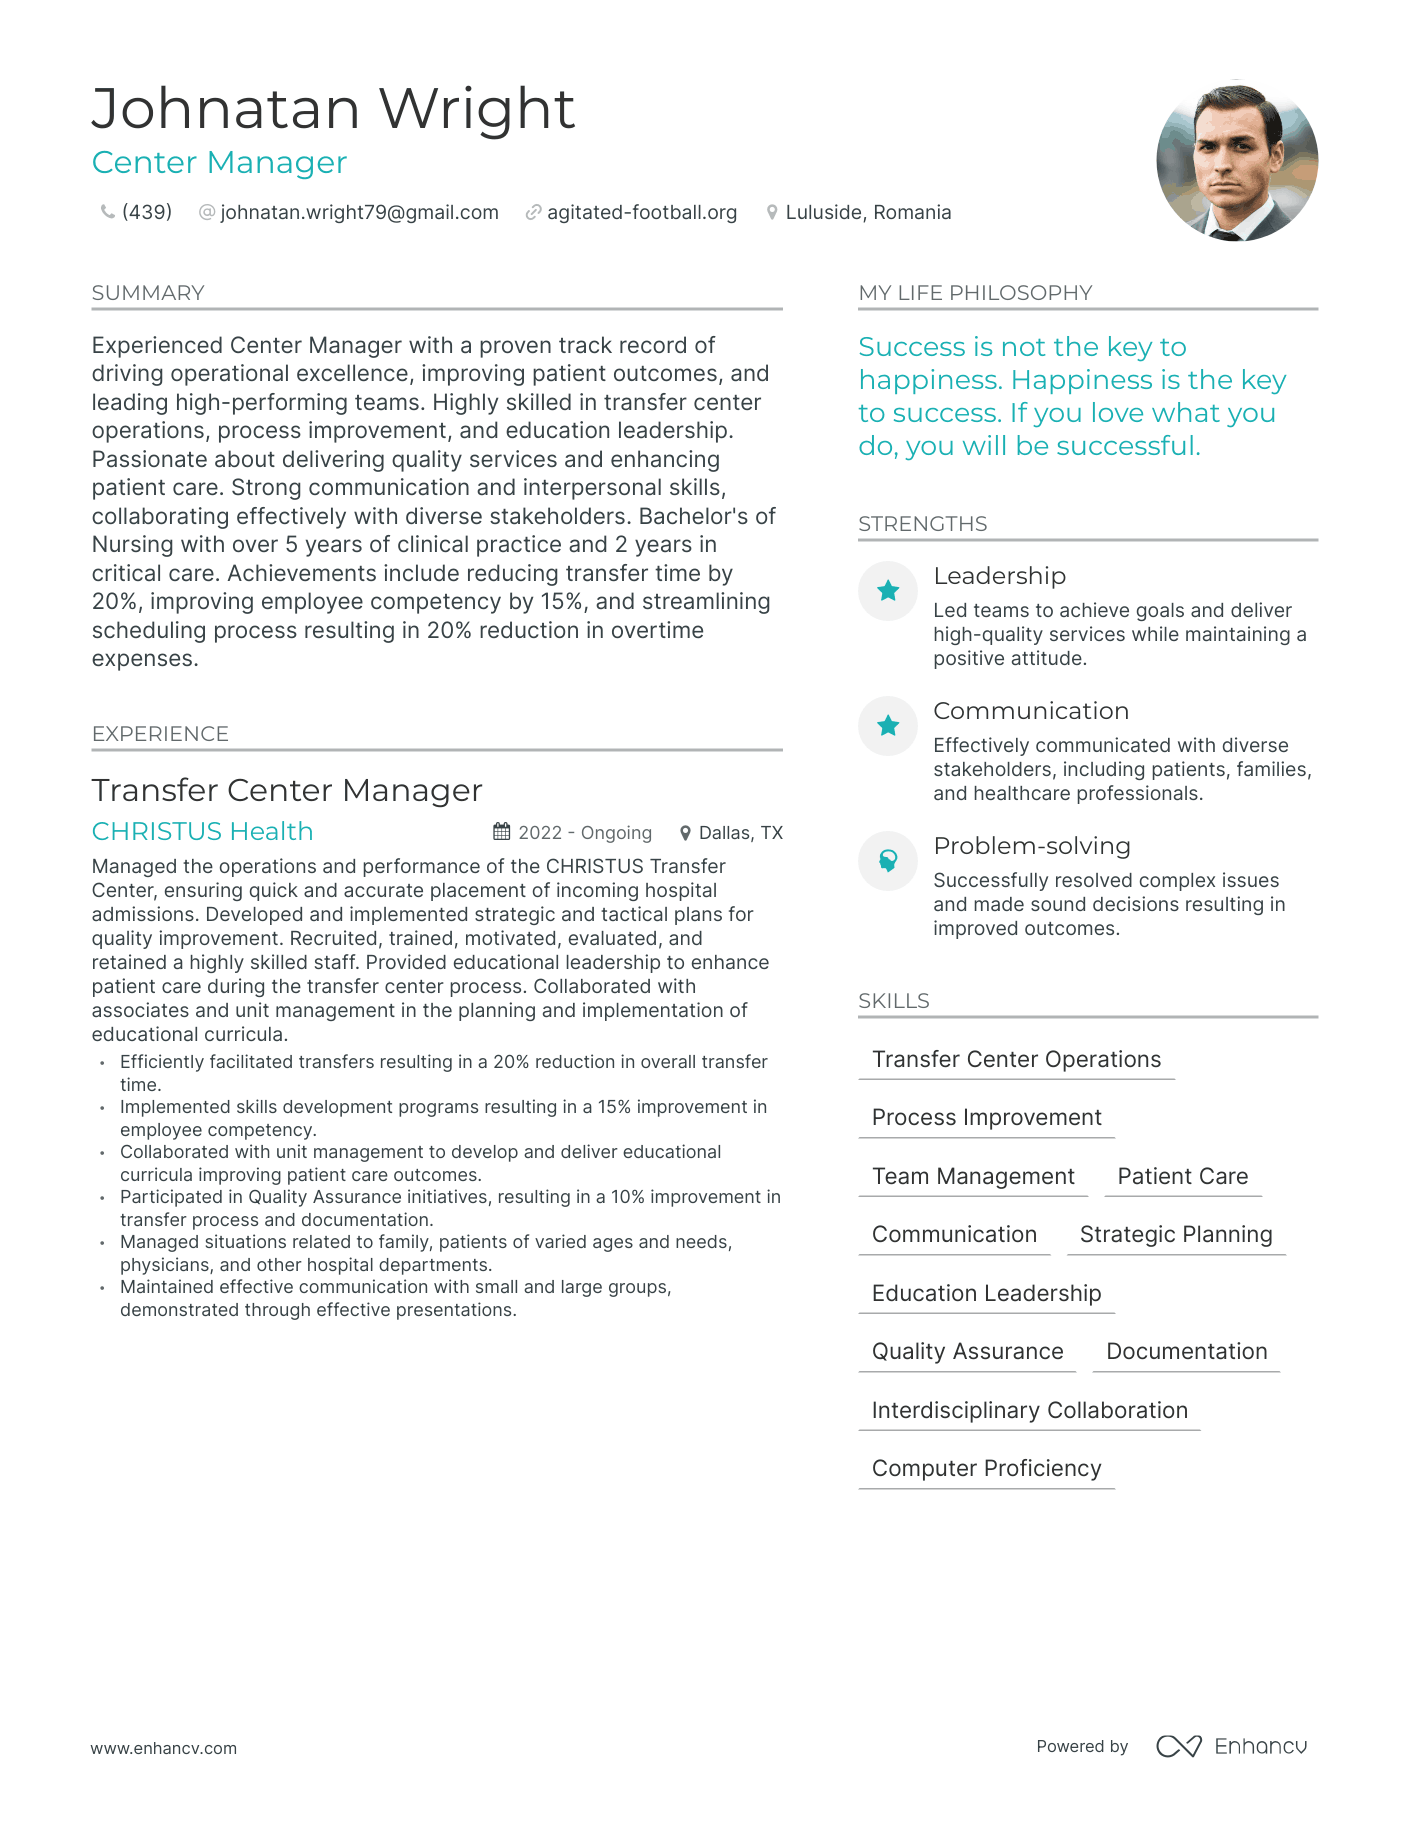 Center Manager resume example